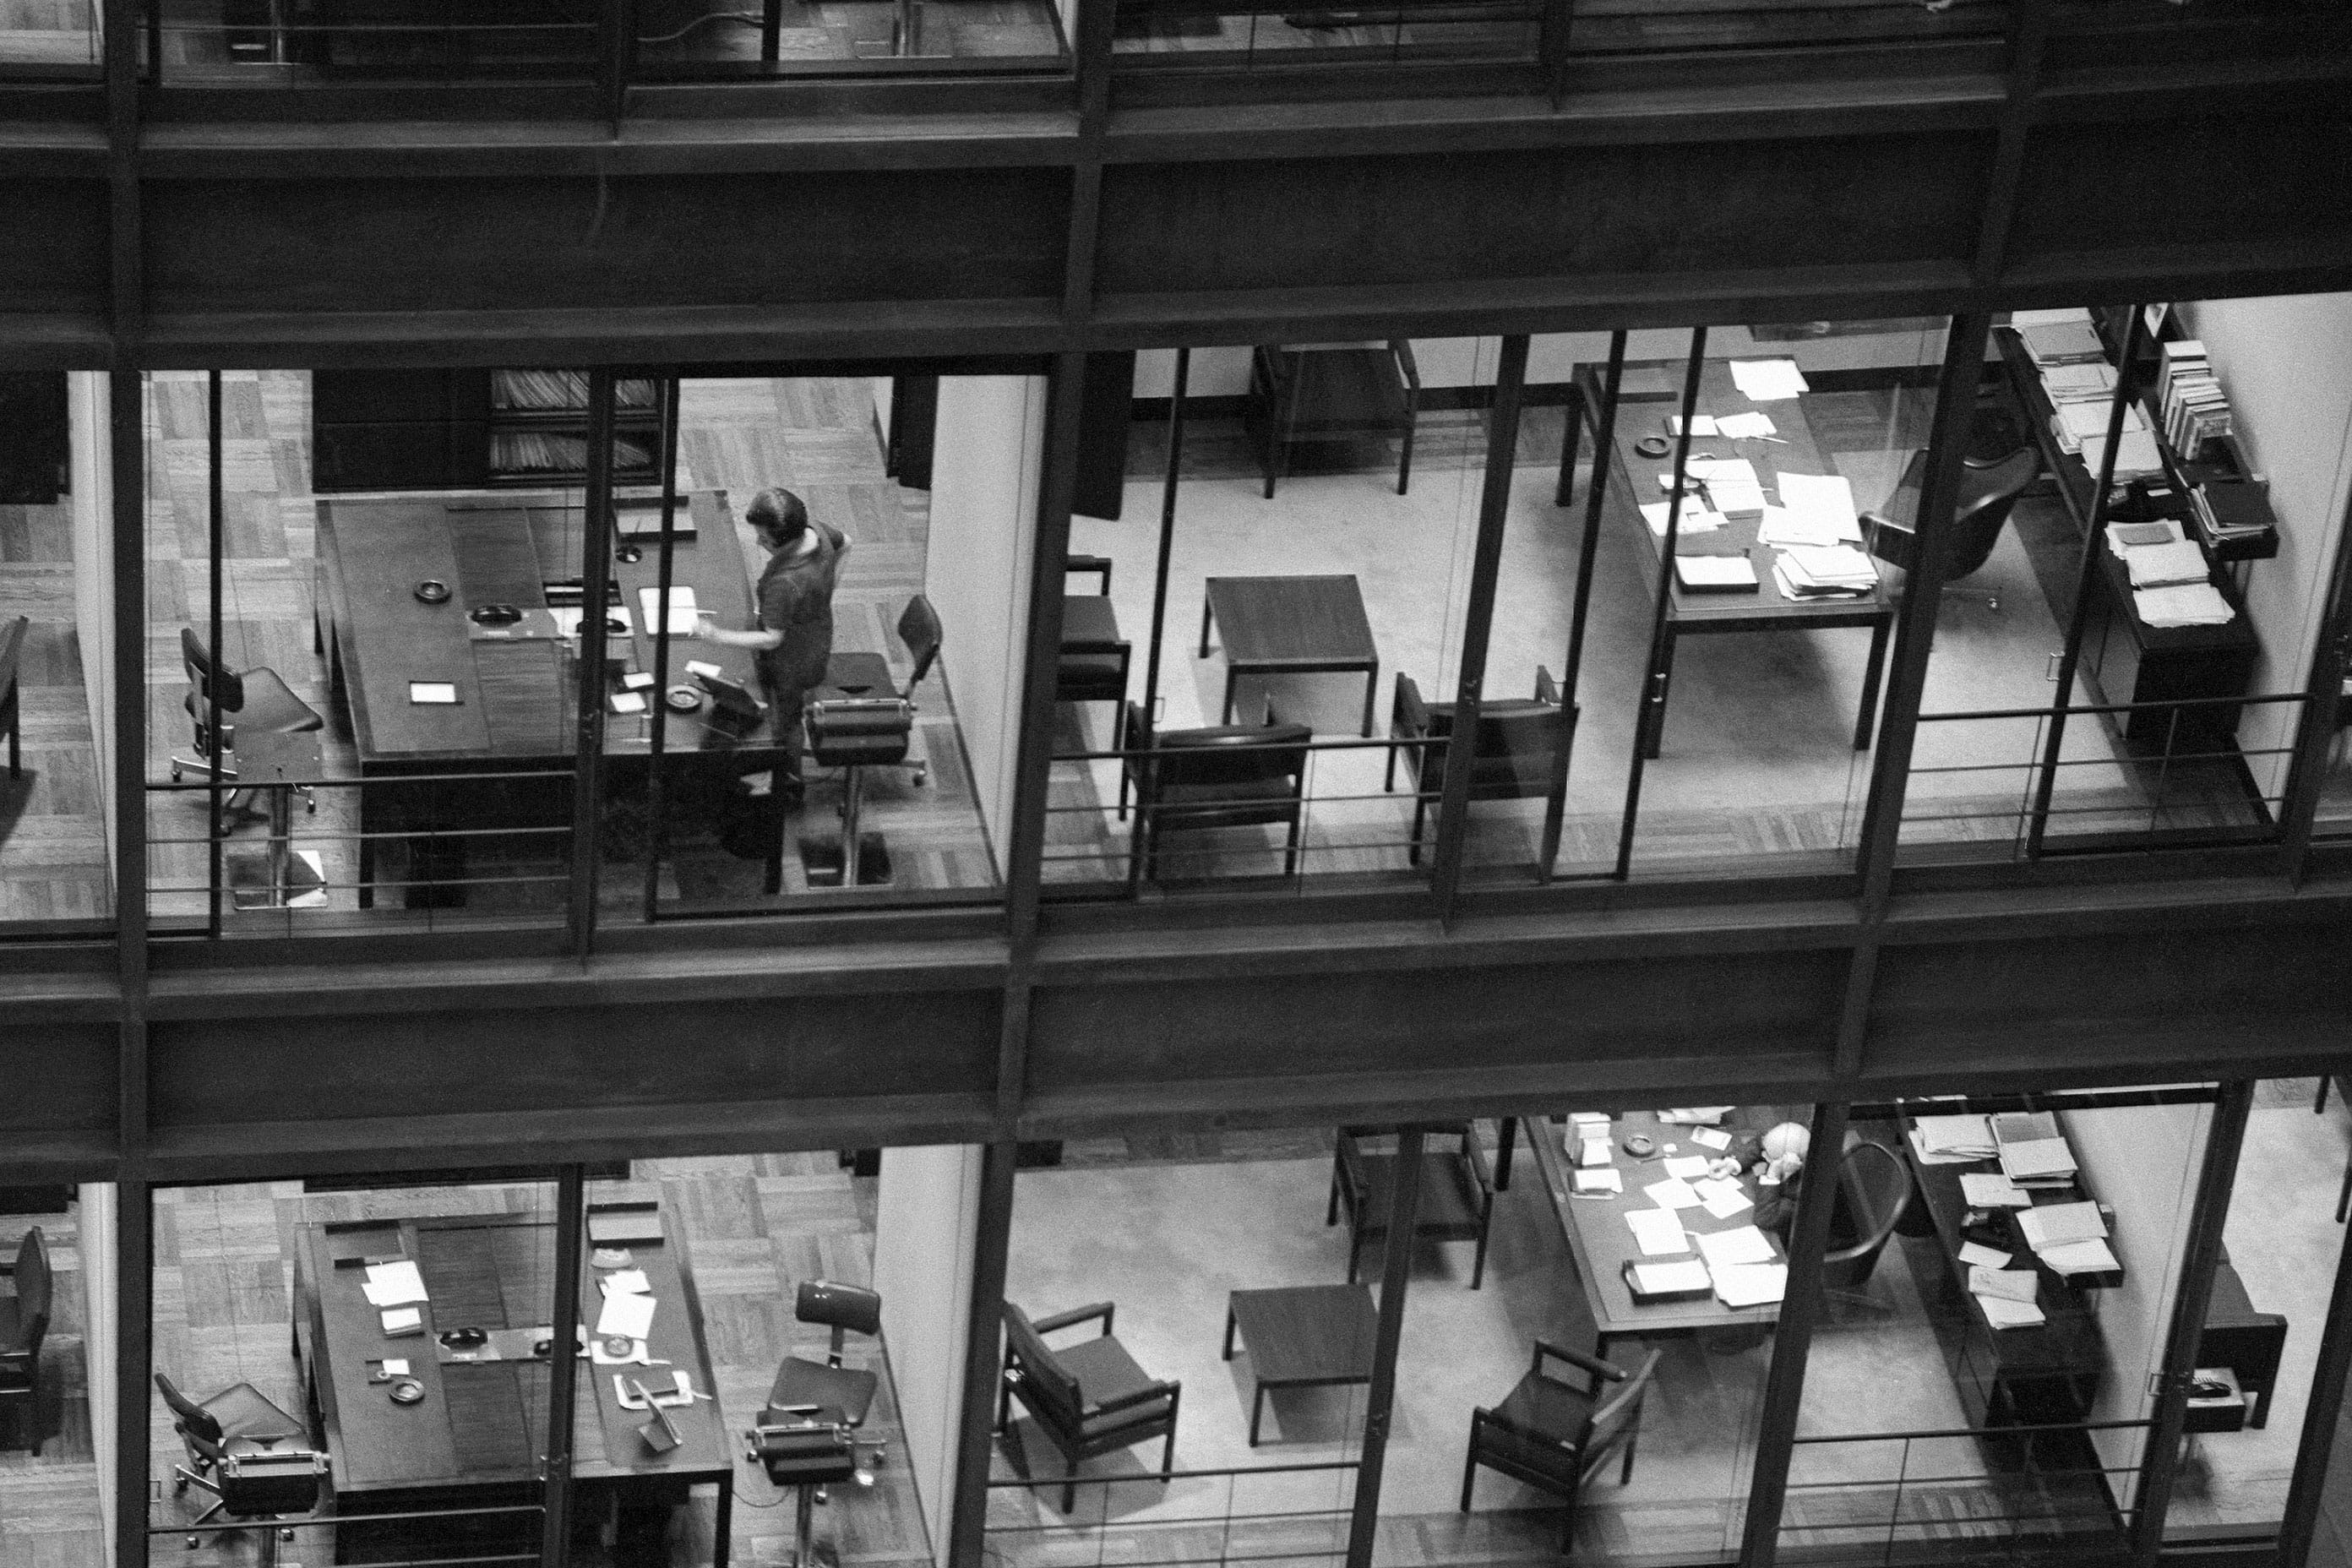 A black and white photo of the outside of an office building showing two floors through the window.